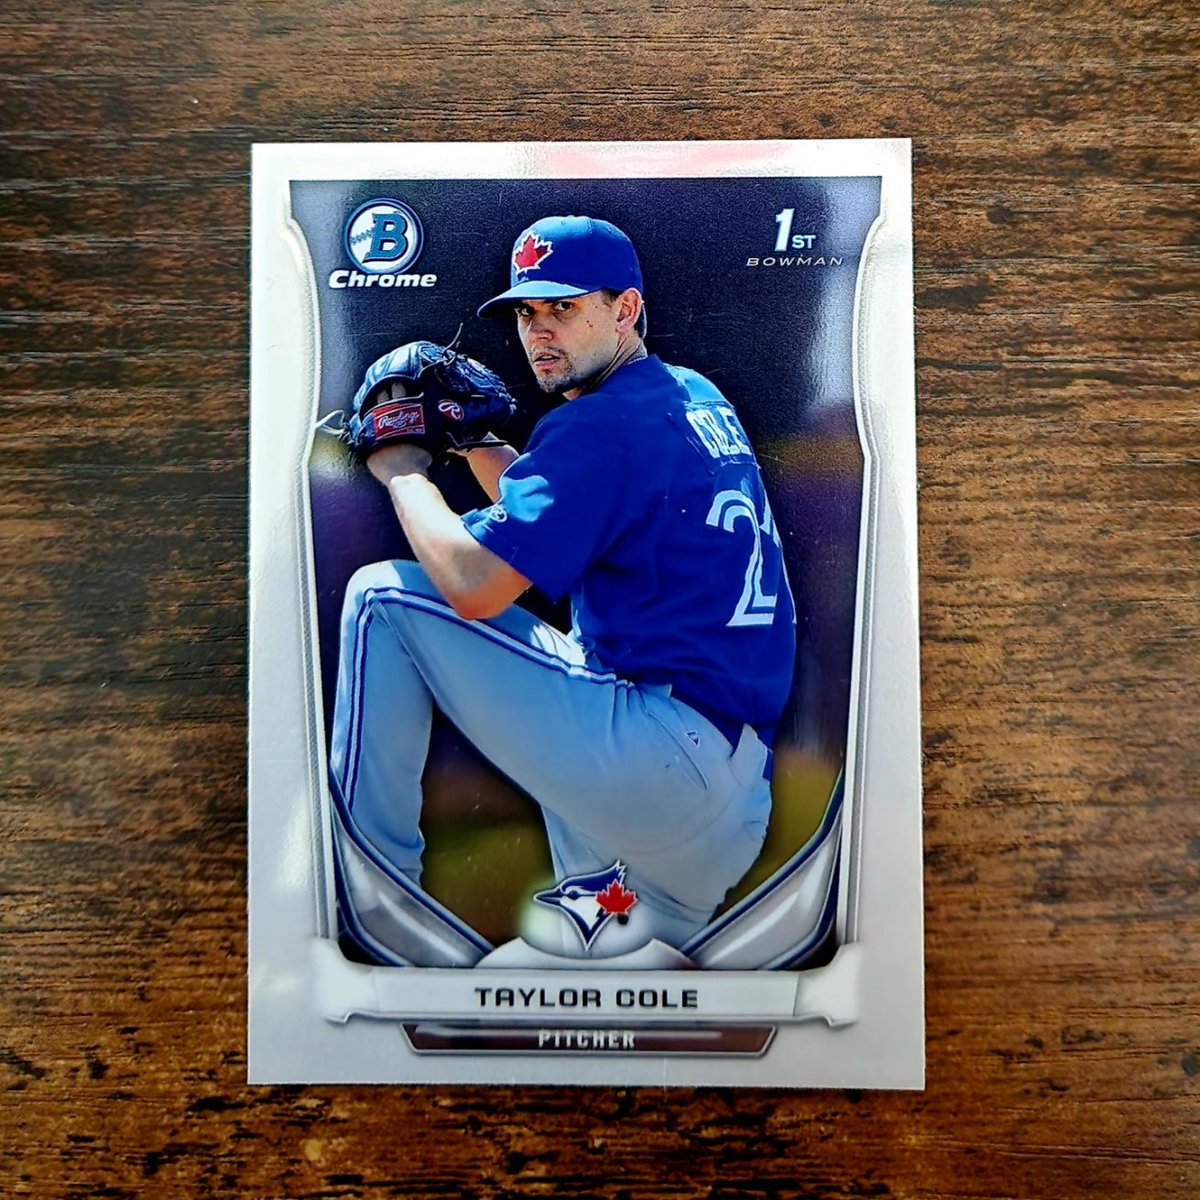 Here's to BYU baseball alum Taylor Cole. It was awesome to follow your MLB career. 2014 Bowman 1st Chrome. 
#taylorcole #byubaseball #byuinmlb #torontobluejays #anaheimangels 
#bowman1st #baseballcards